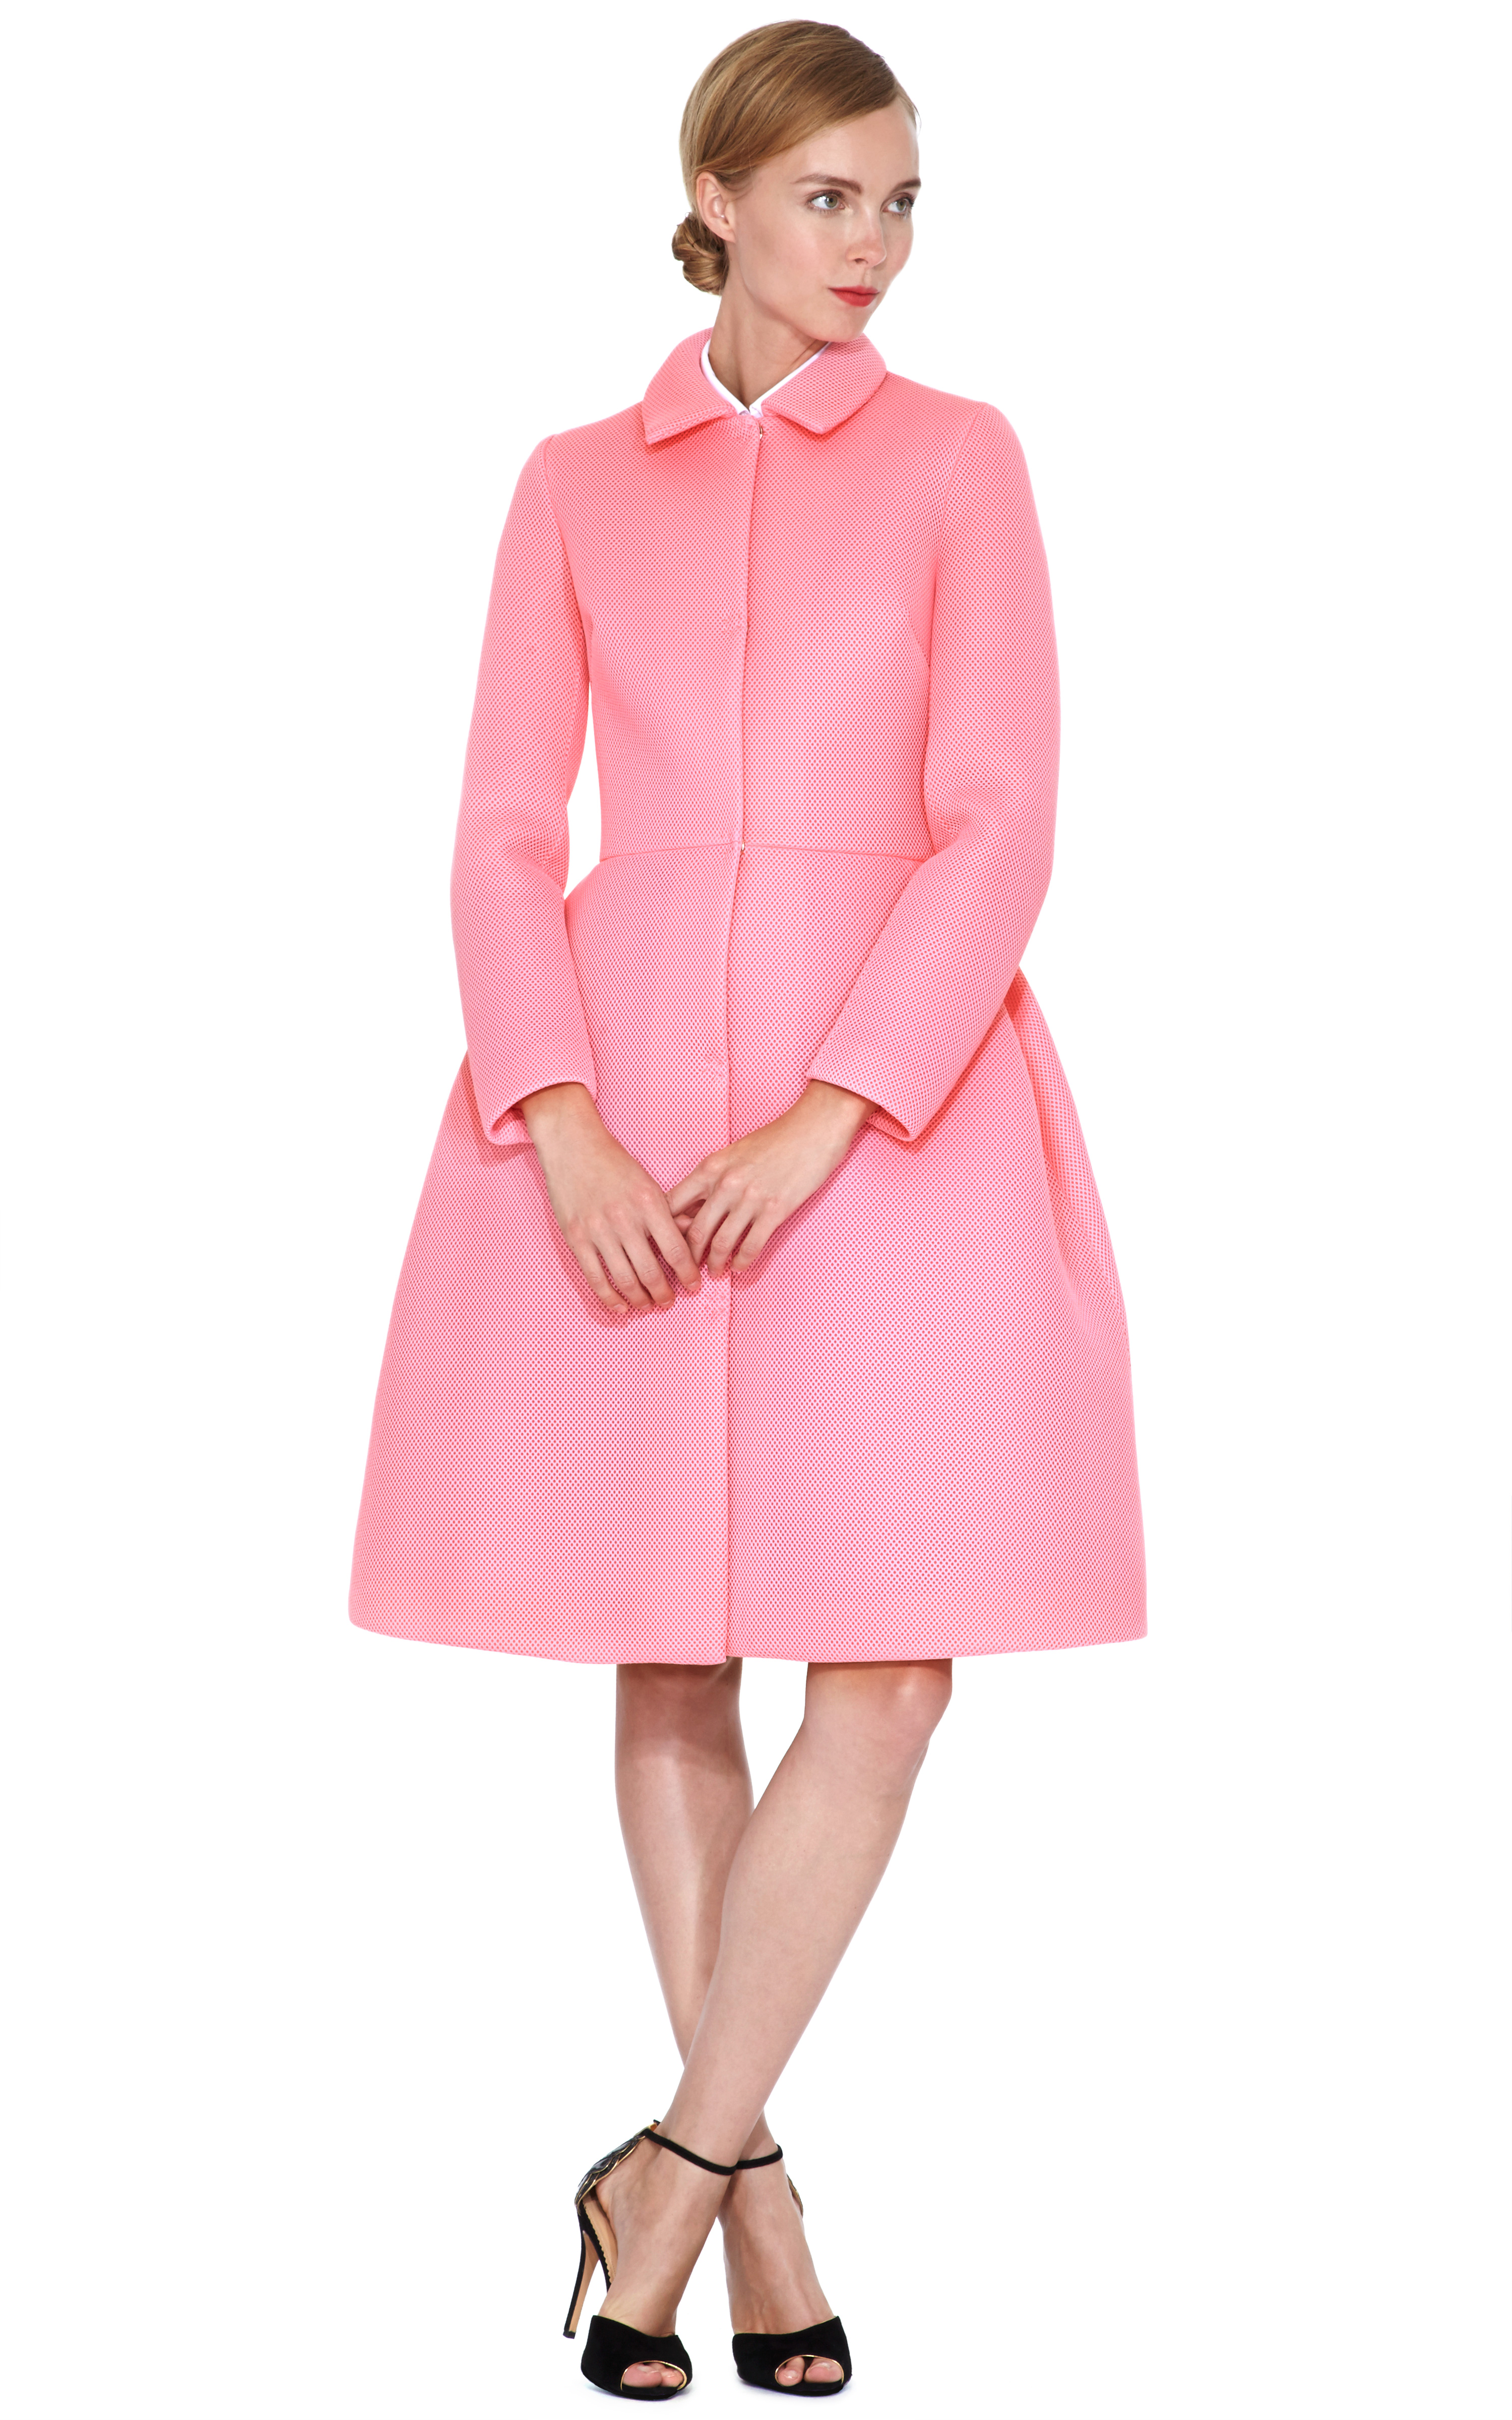 Simone Rocha Knit Mesh Coat with Collar in Pink (Red) | Lyst